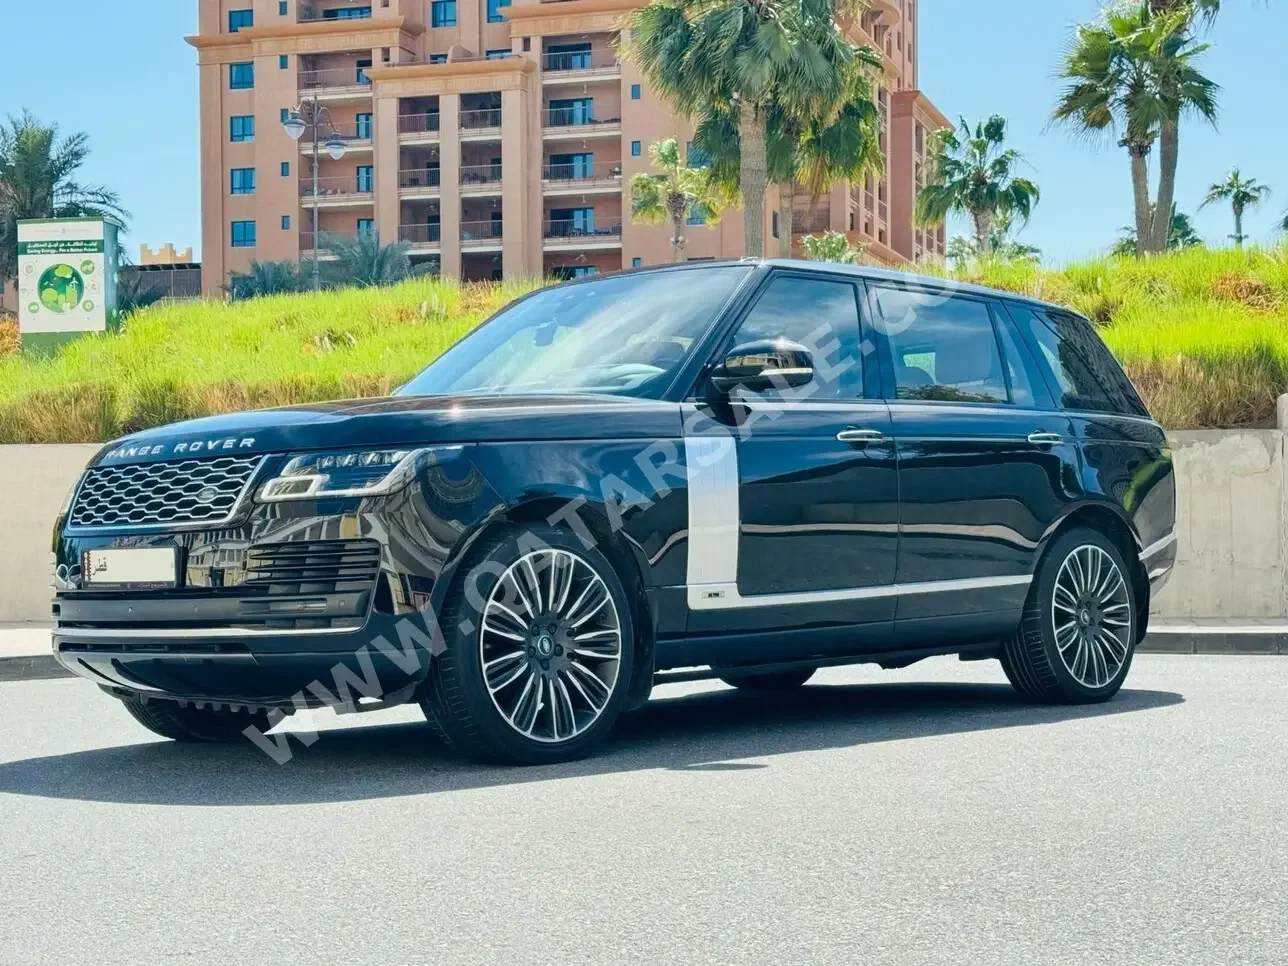 Land Rover  Range Rover  Vogue  Autobiography  2018  Automatic  83,000 Km  8 Cylinder  Four Wheel Drive (4WD)  SUV  Black